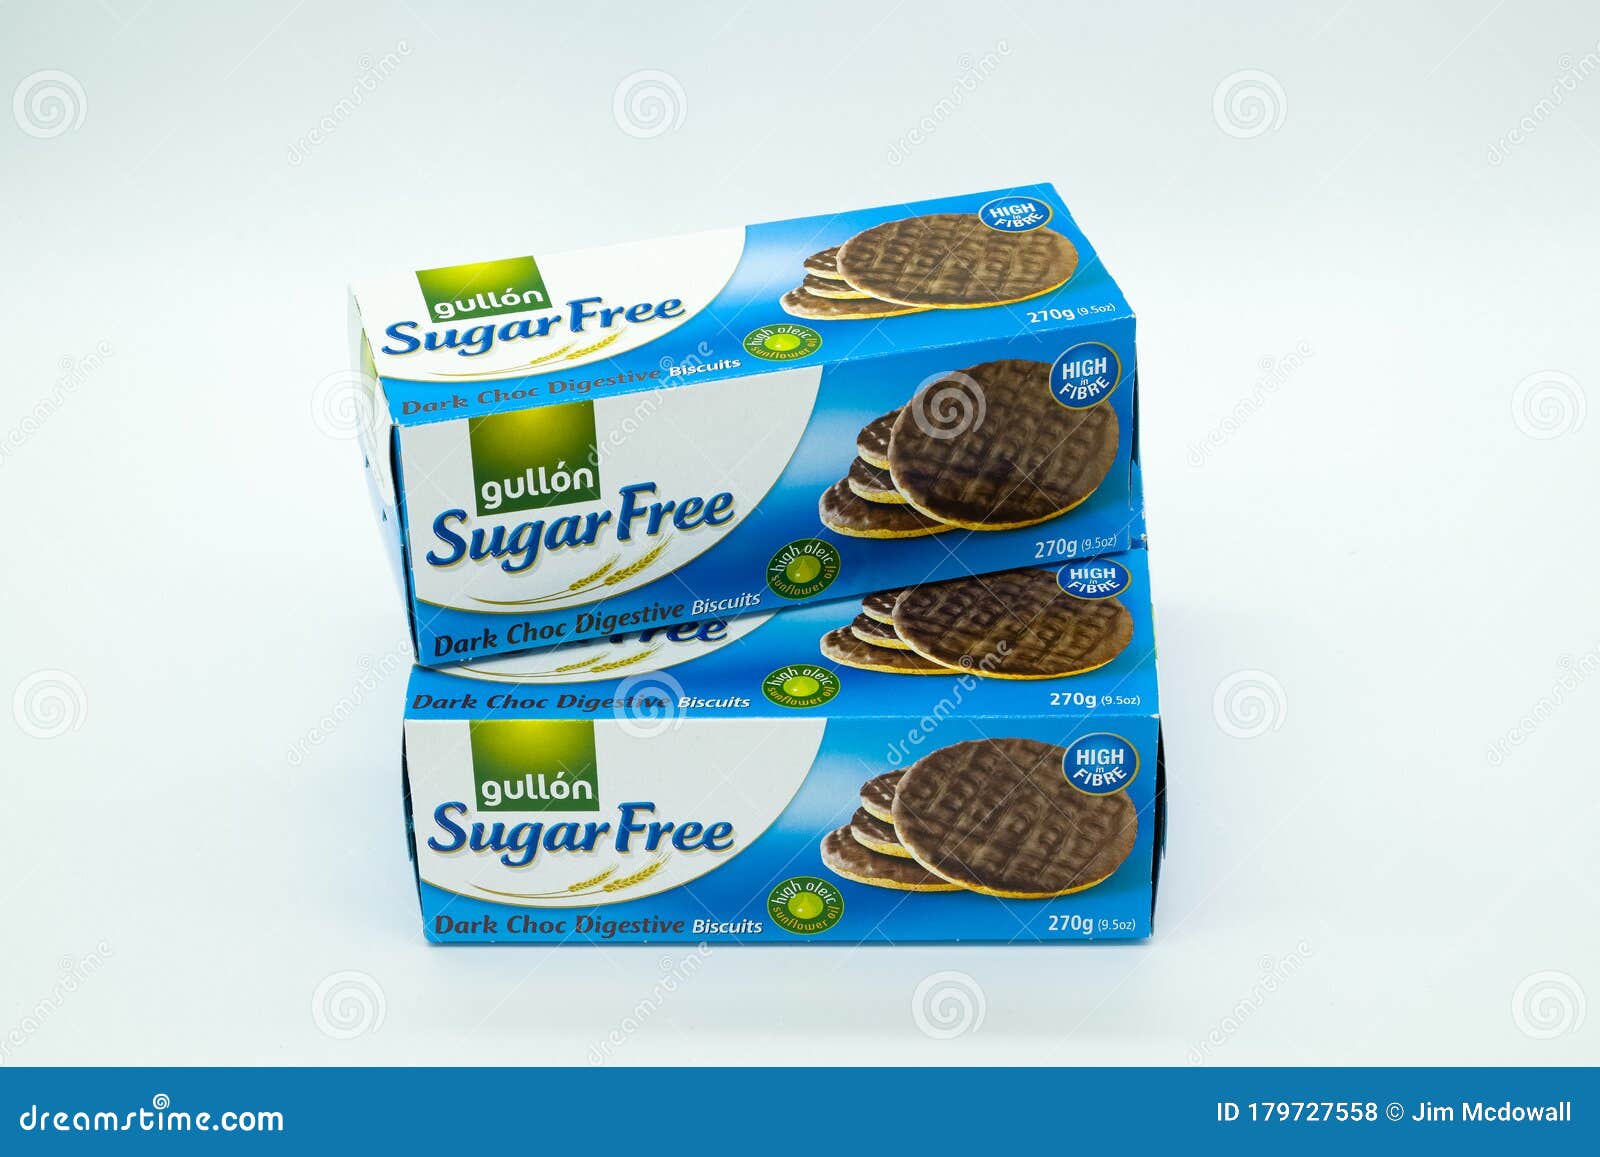 Gullon Branded Sugar Free Chocolate Digestive Biscuits In Recyclable Packaging And Popular With Diabetics Editorial Stock Photo Image Of Healthier Recycling 179727558